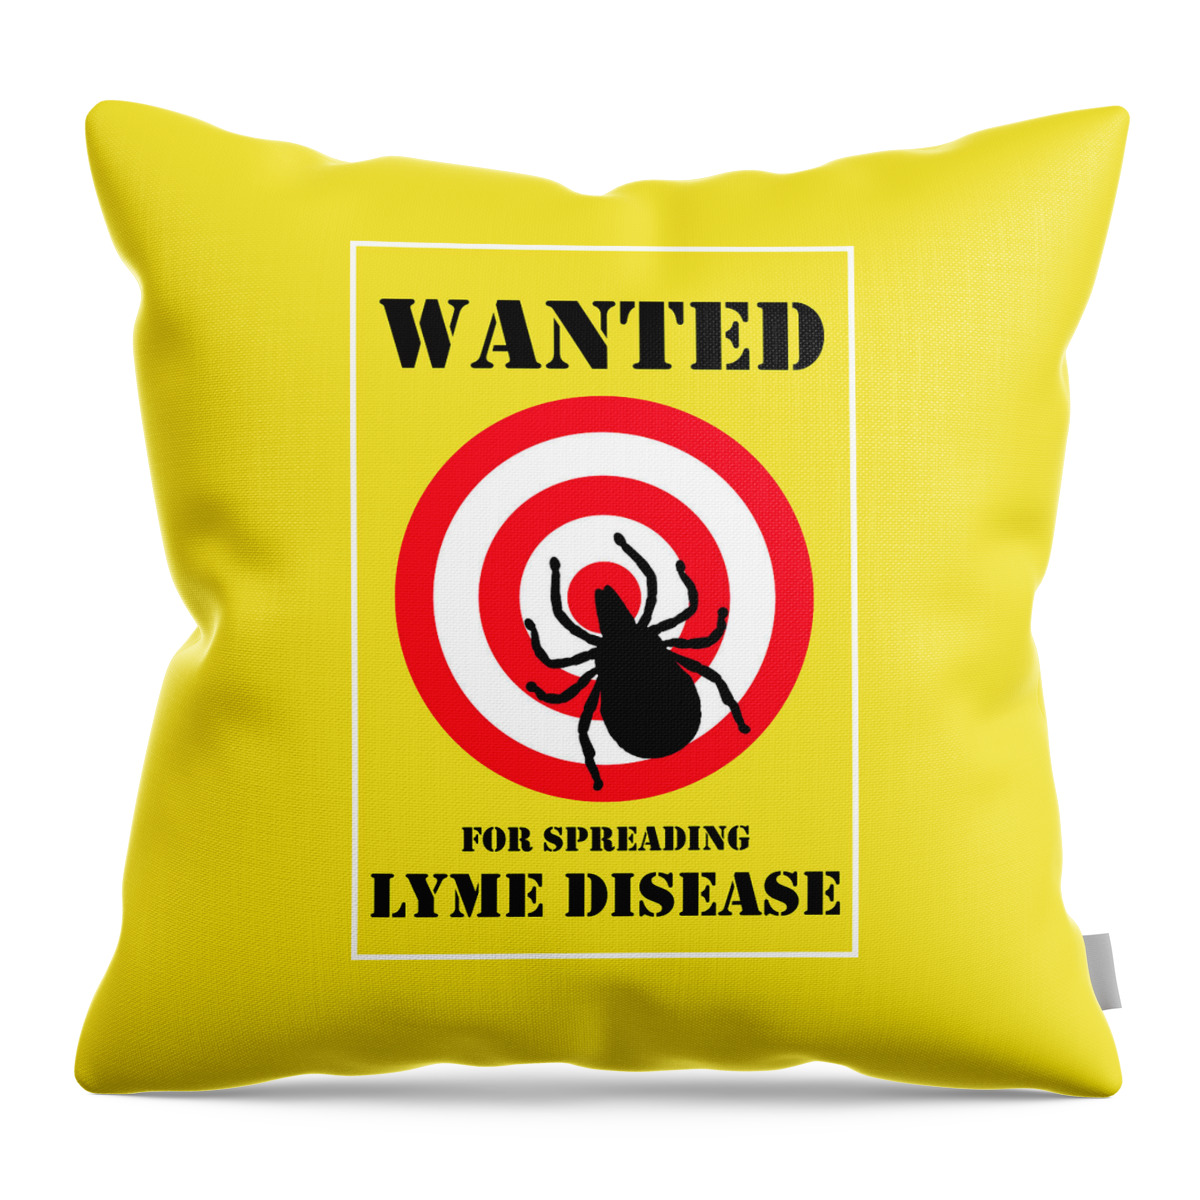 Richard Reeve Throw Pillow featuring the digital art Wanted for Spreading Lyme Disease by Richard Reeve